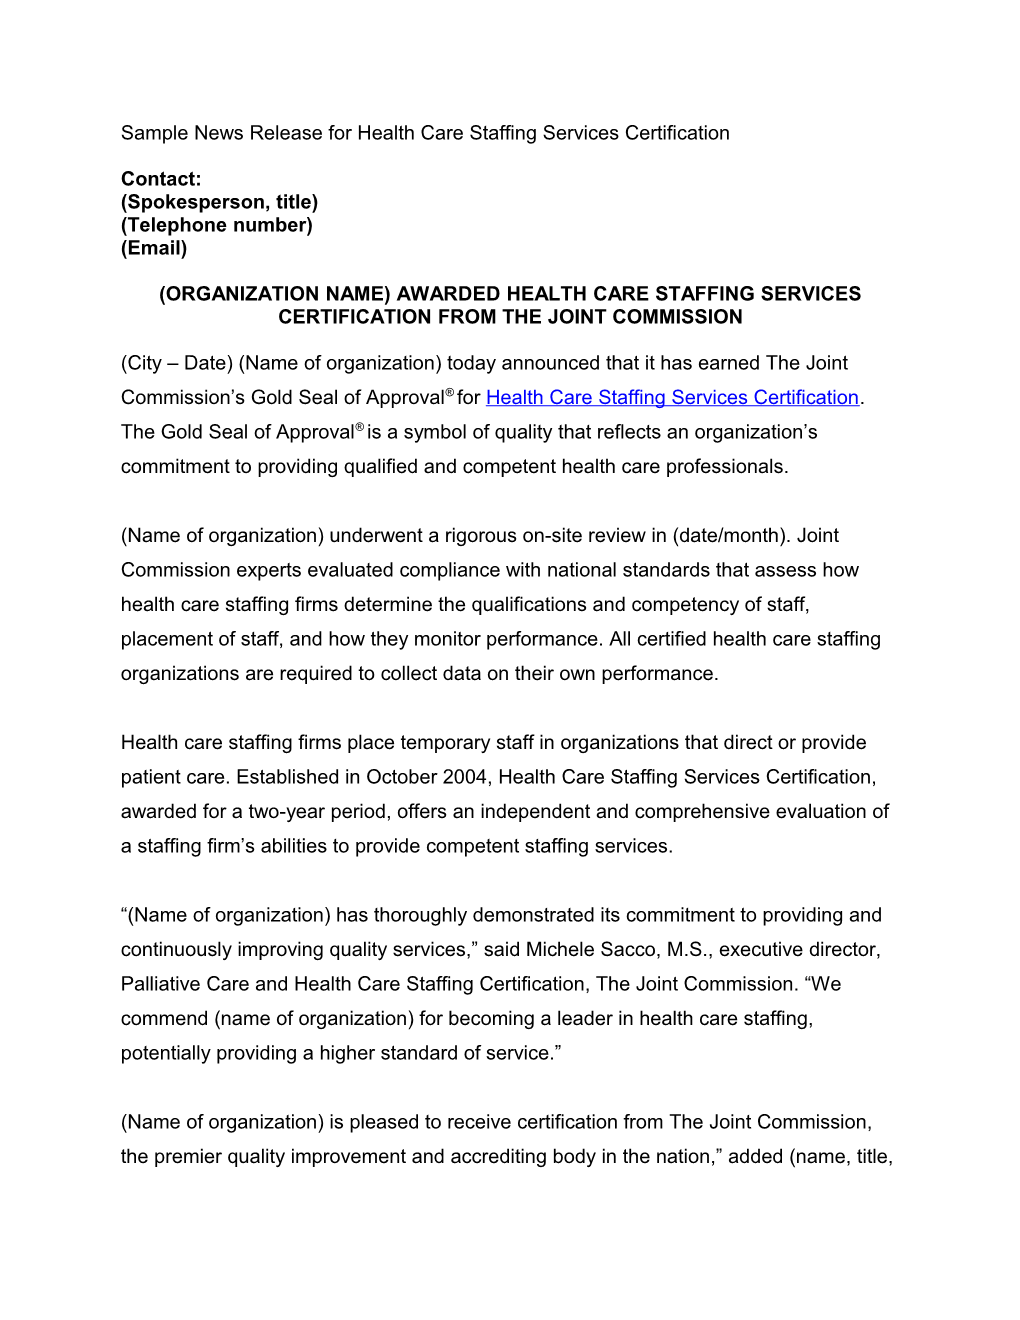 Sample News Release for Health Care Staffing Services Certification